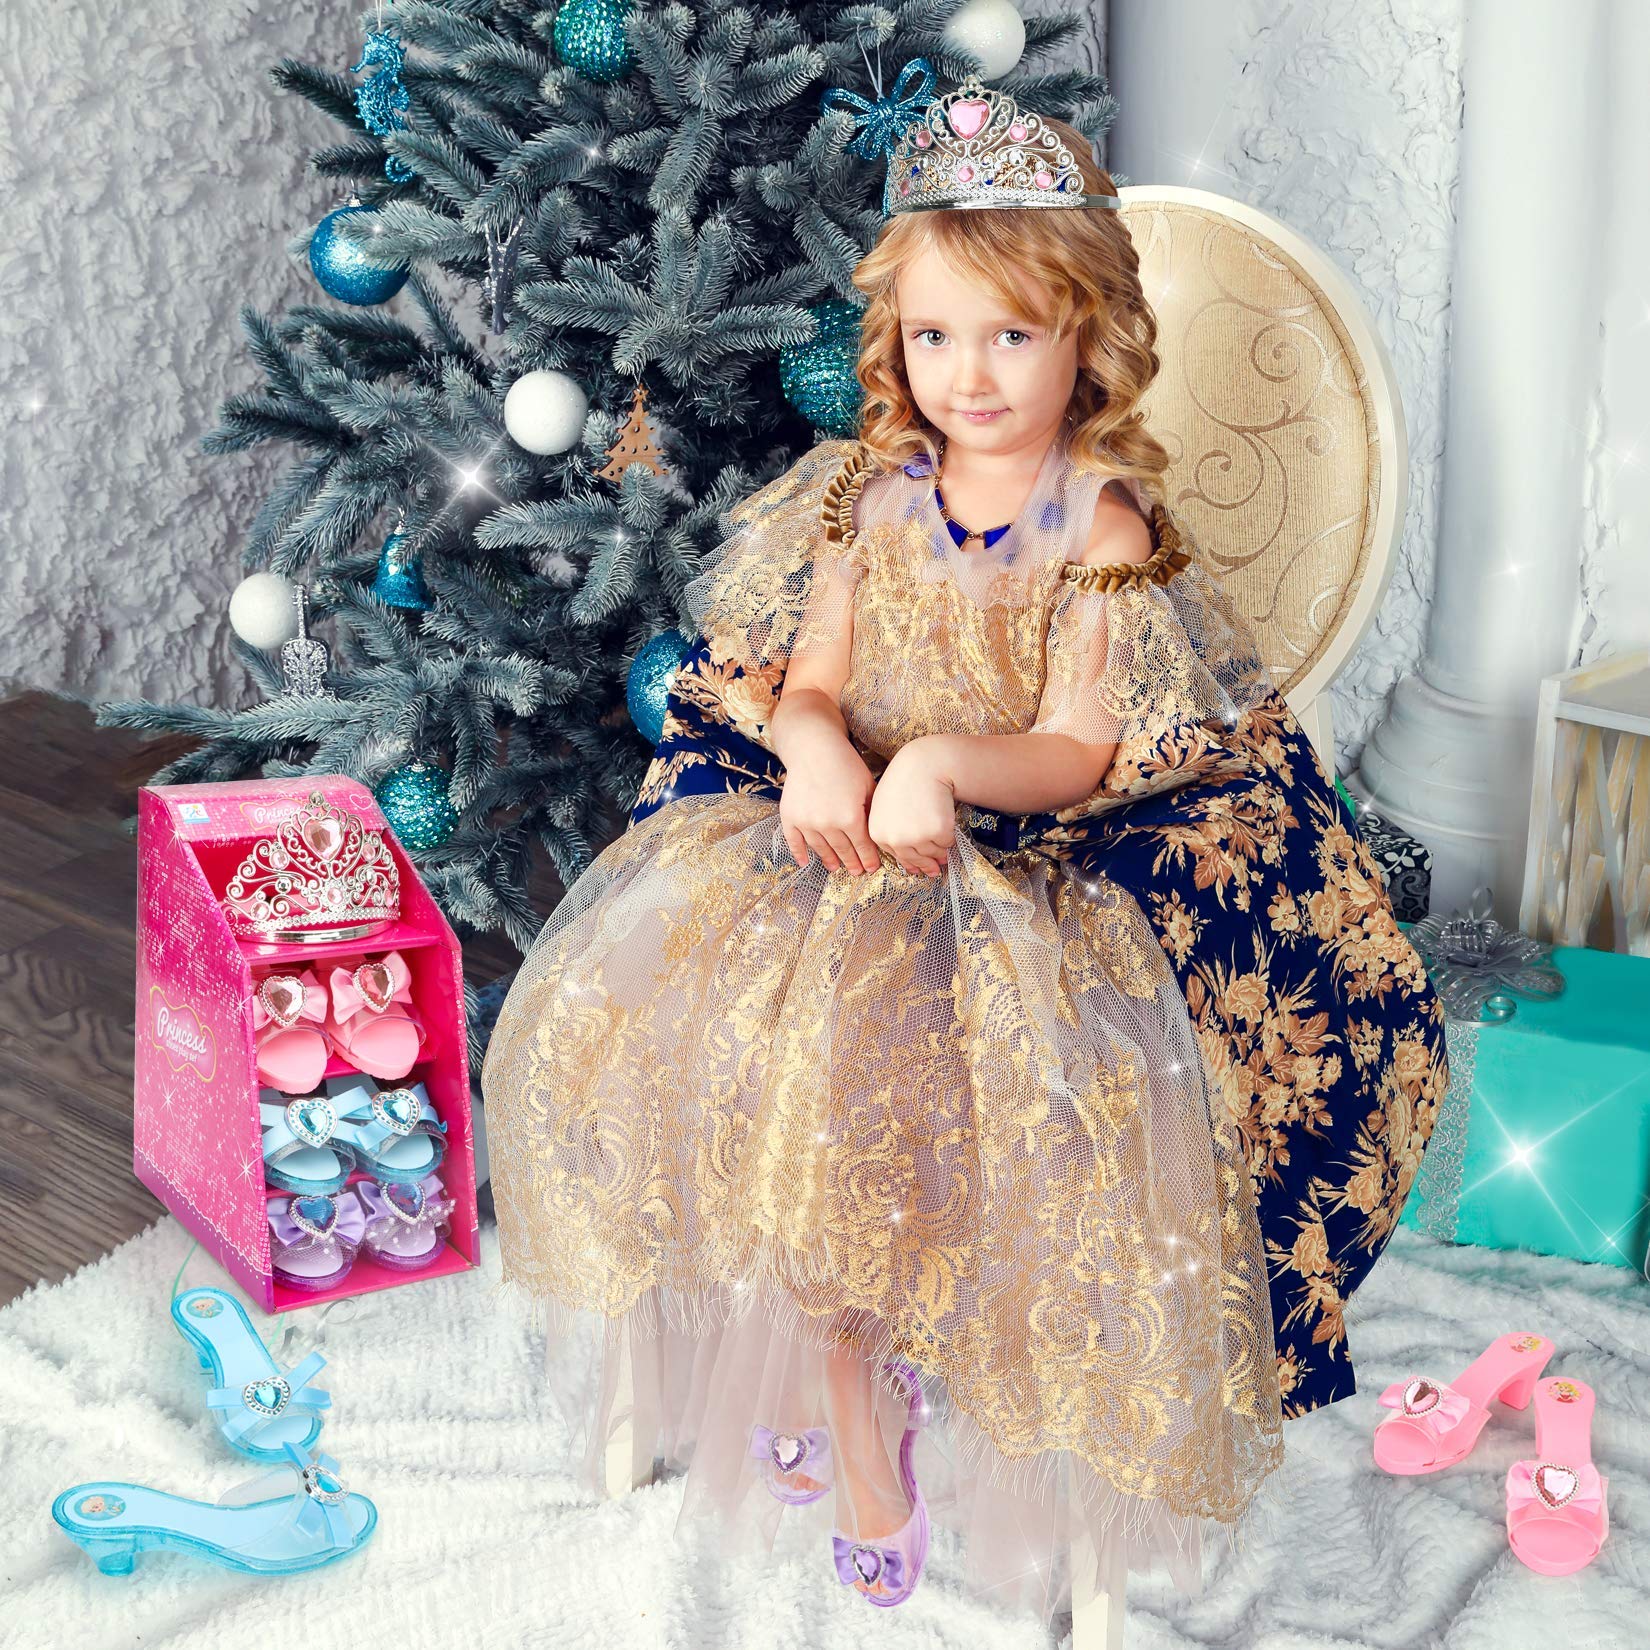 Mastom Girls Play Set! Princess Dress Up Shoes and Tiara (3 Pairs of Shoes + 1 Tiara) Role Play Collection Fashion Princess Shoes for Little Girls